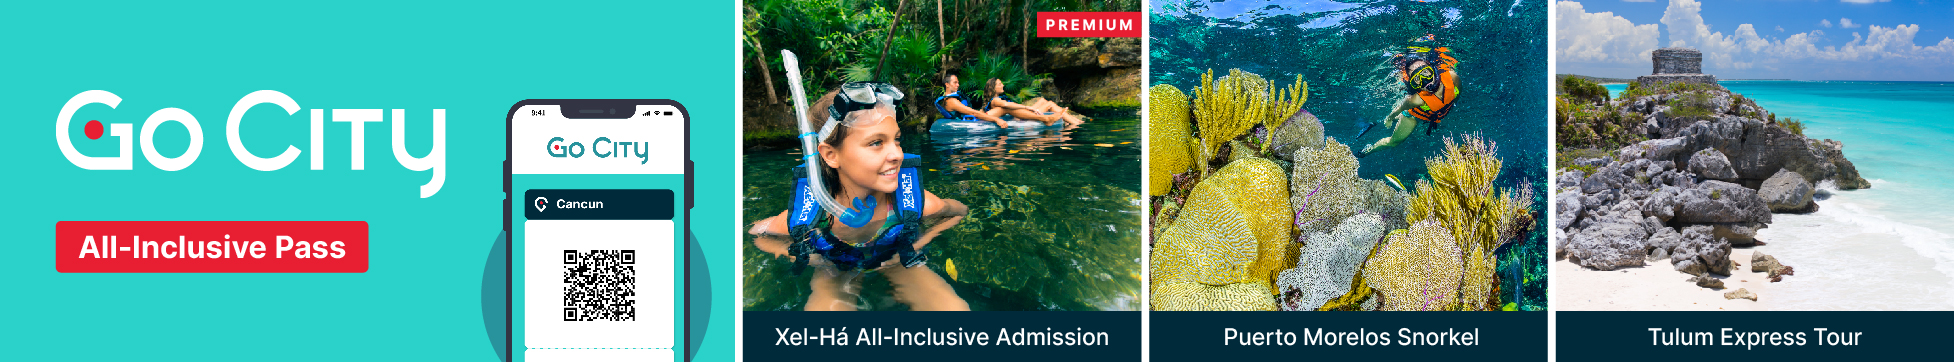 Go City | Cancun All-Inclusive Pass Header Image